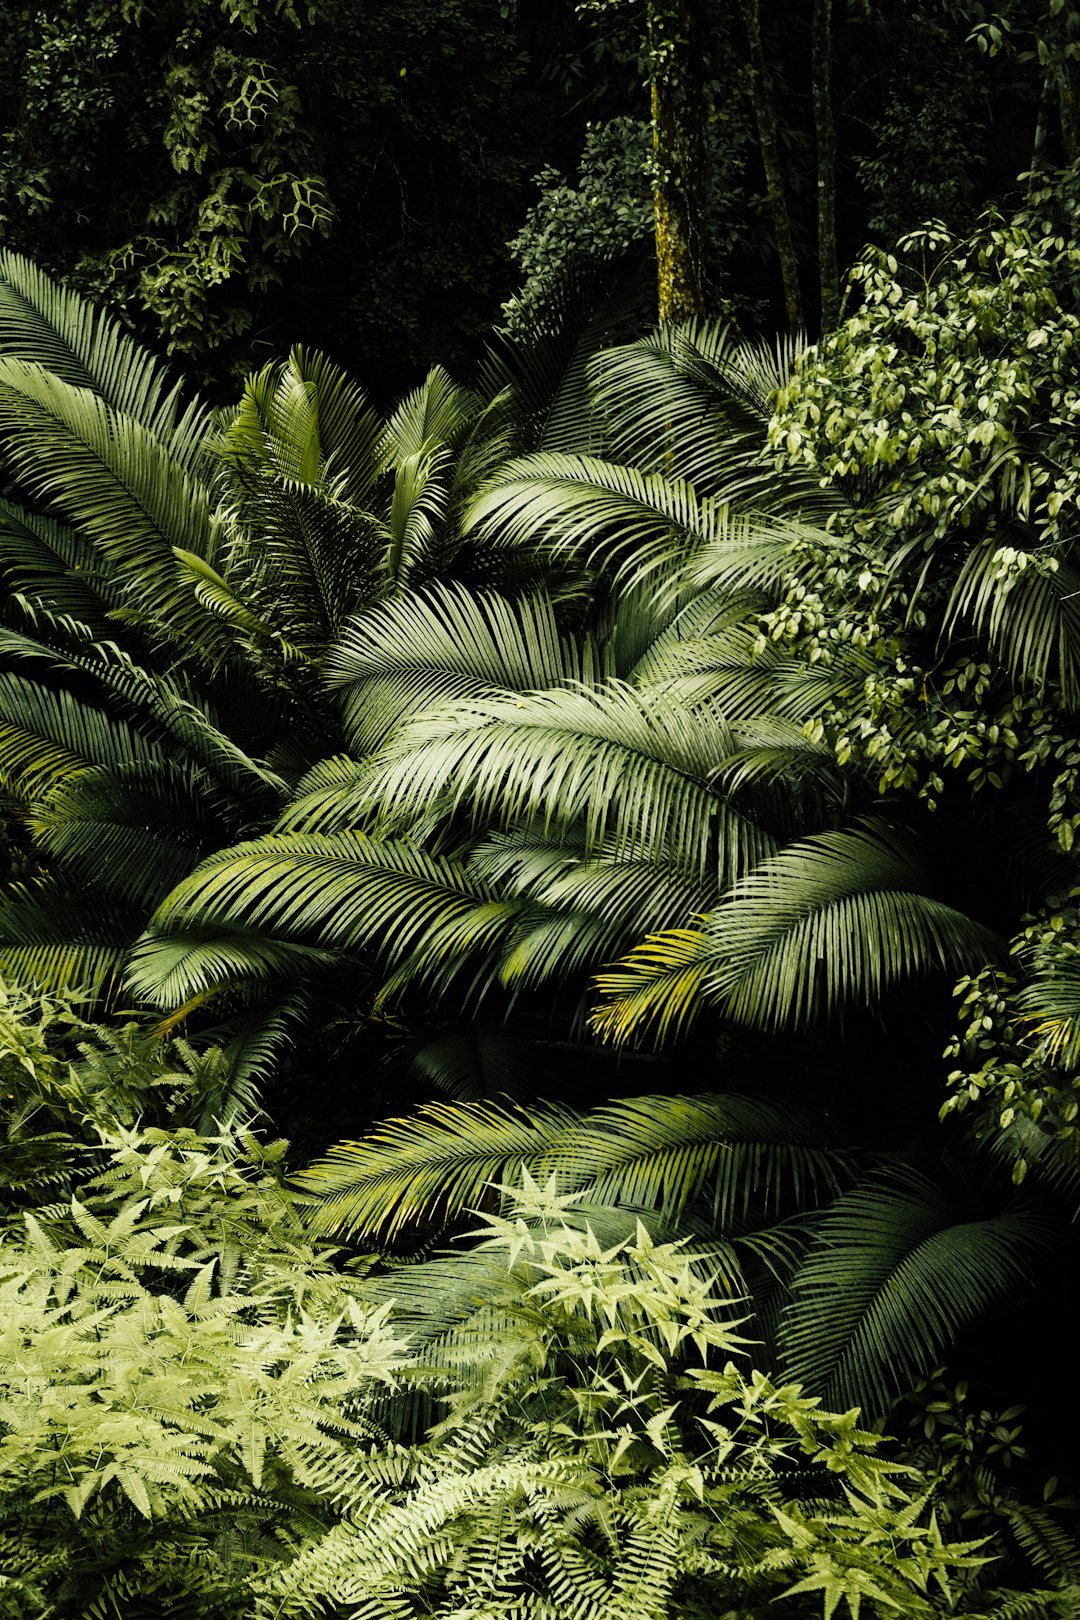 photograph of a lush tropical rainforest with ferns and palm leaves, dark green foliage in a vibrant style. –ar 85:128